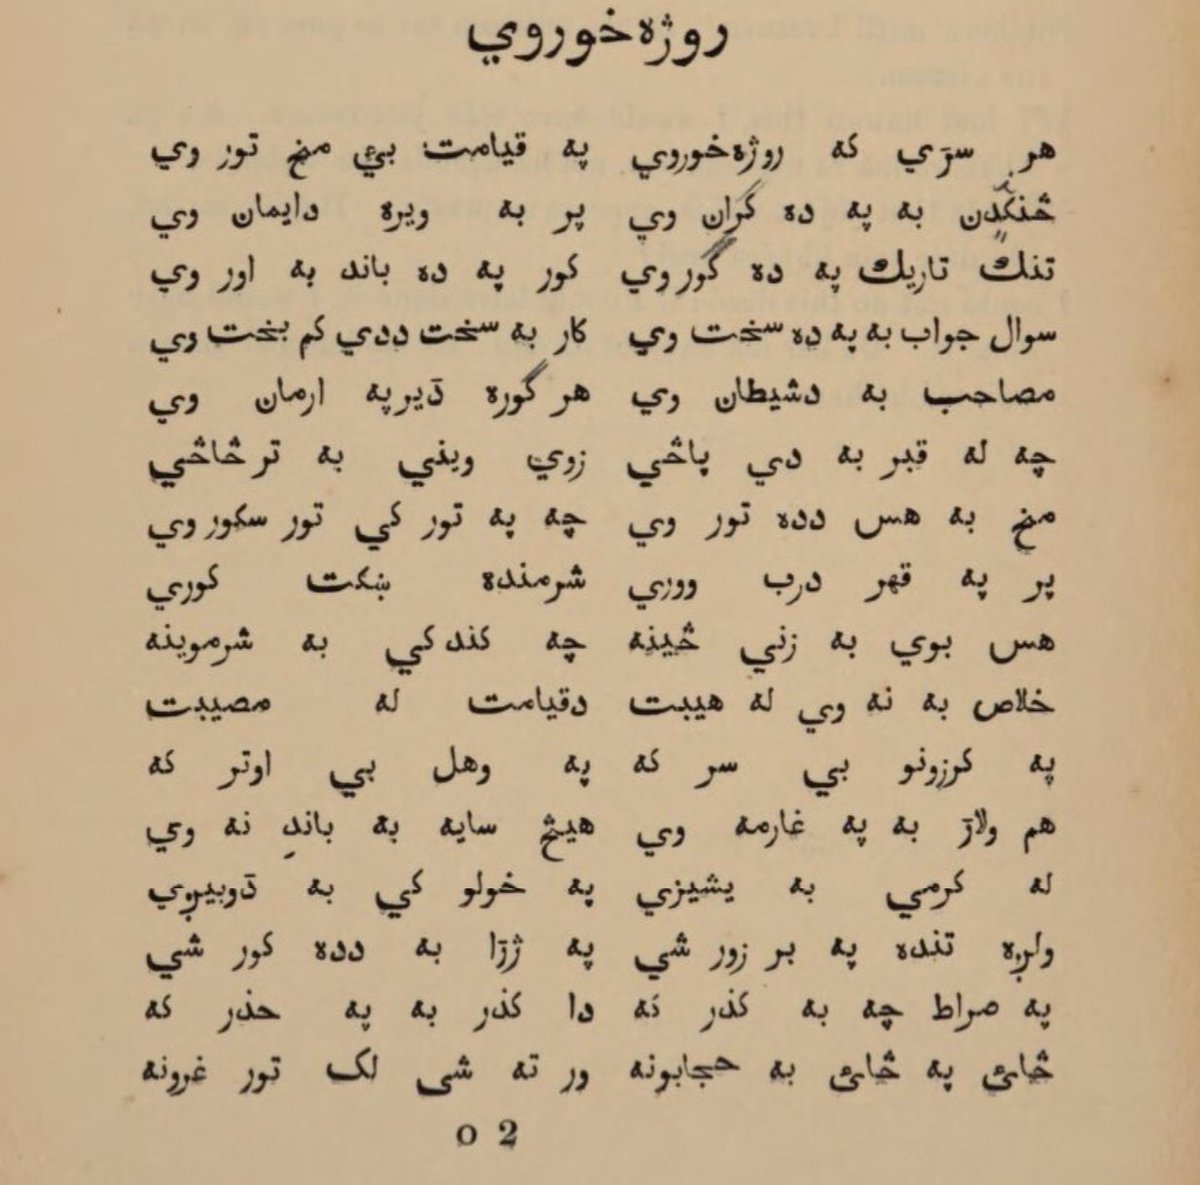 Here is a 200~ years old Pashto poem titled (روژه خوري) that warns those who do not fast during the holy month of #Ramadan about punishments and troubles that await them in the afterlife. For Pashtuns/Afghans, fasting in #Ramadan is not only a religious obligation but also a